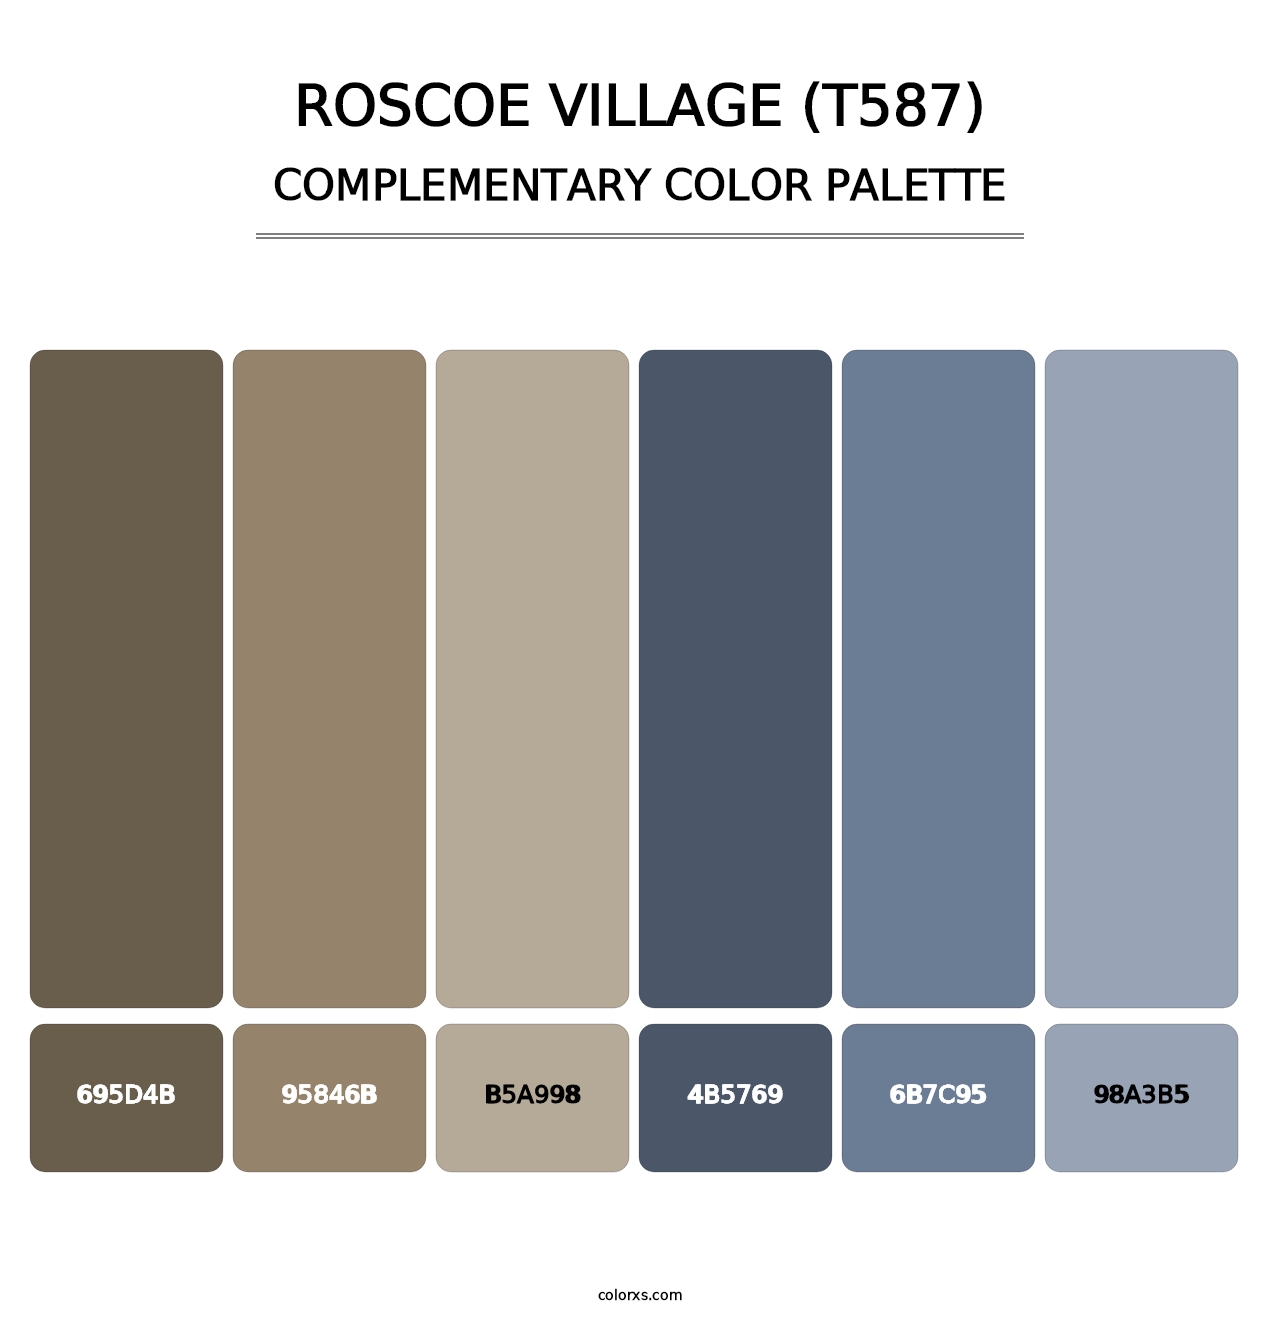 Roscoe Village (T587) - Complementary Color Palette